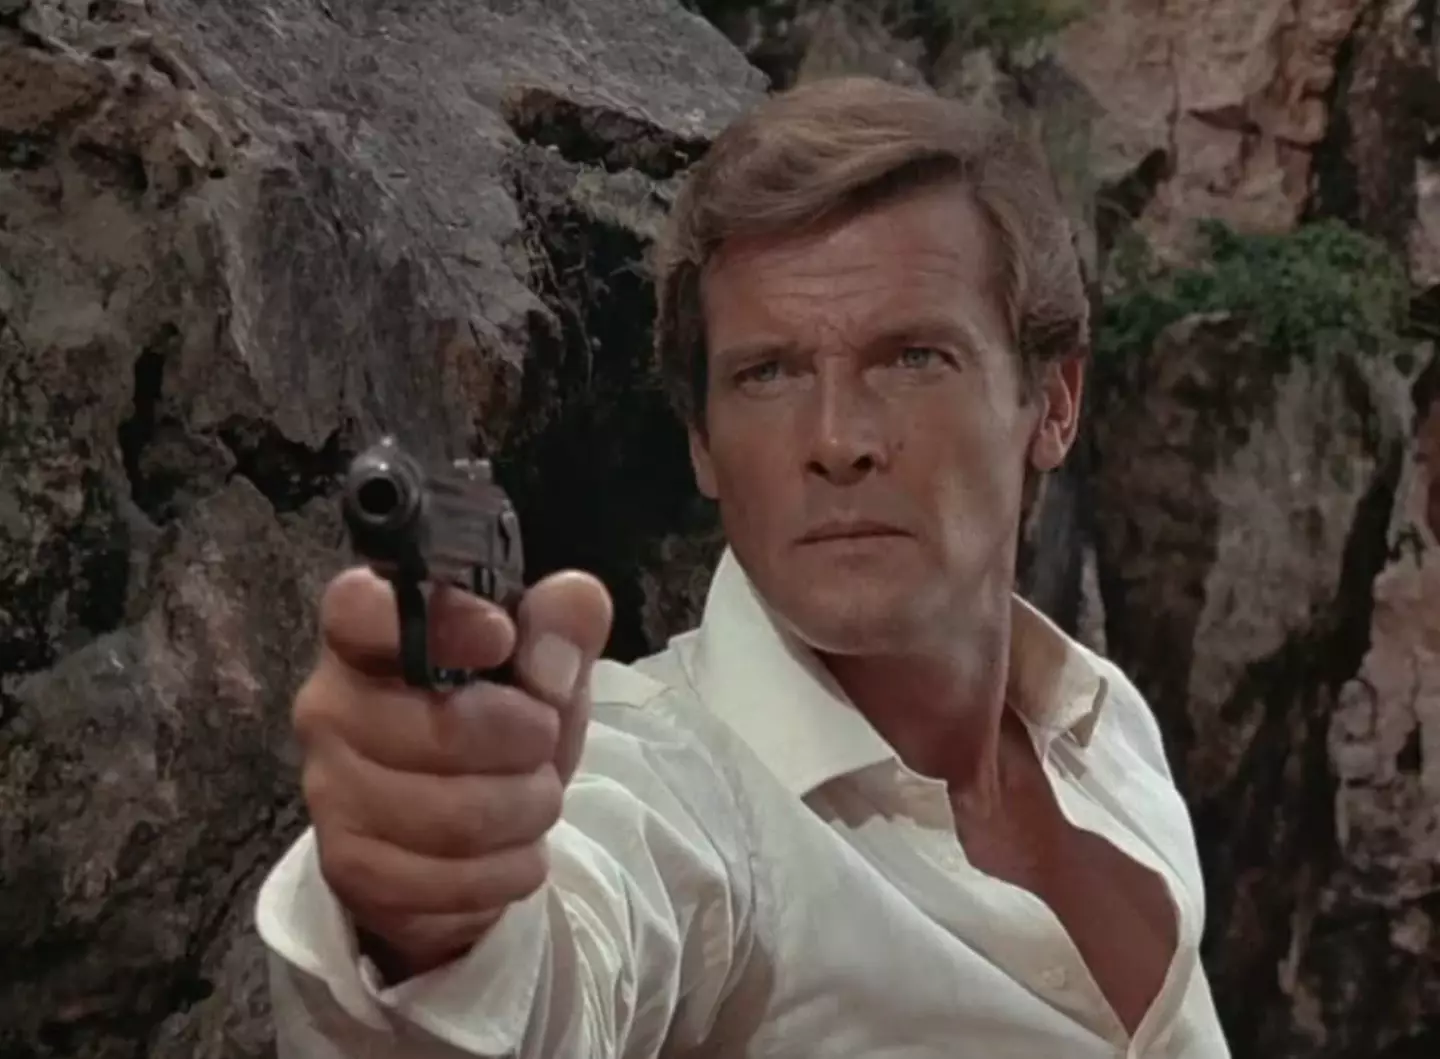 Roger Moore in the 1974 Bond film The Man with the Golden Gun.